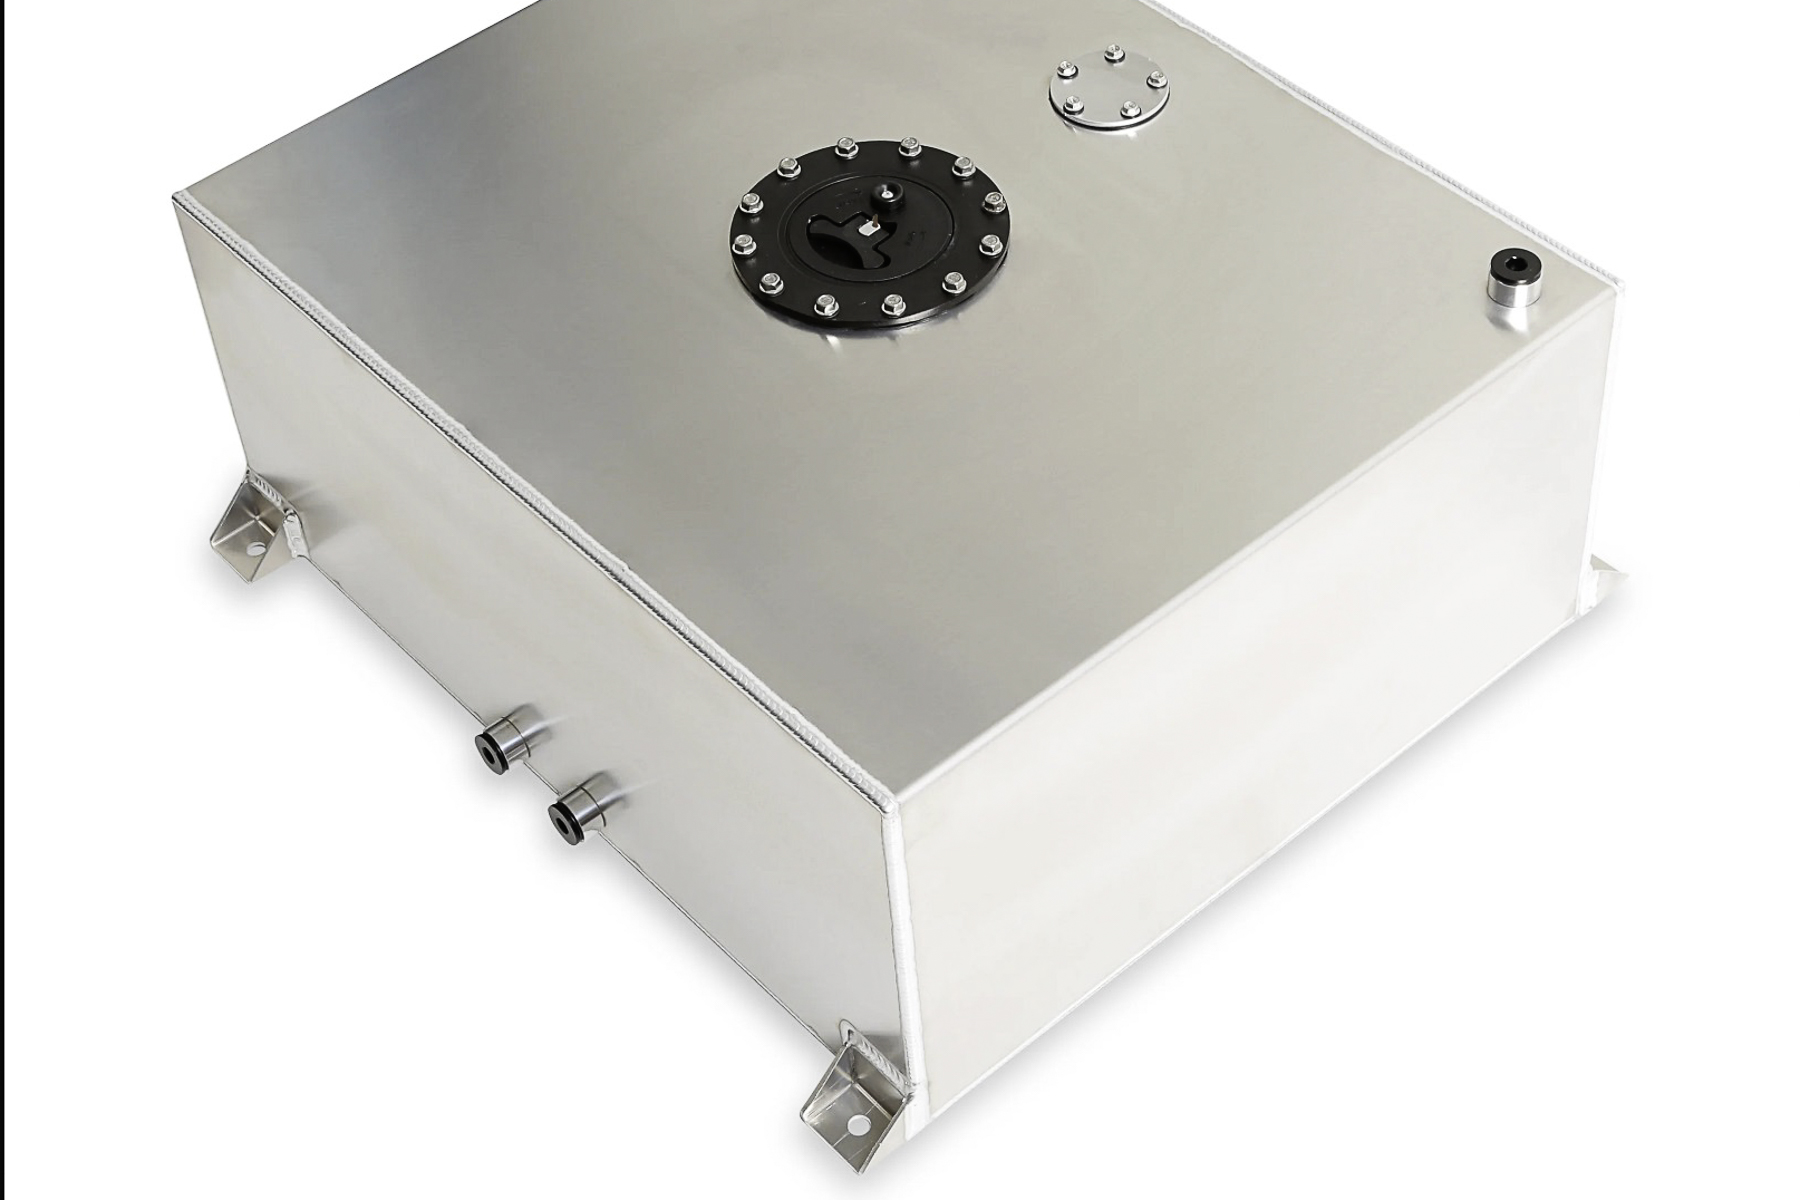 Holley’s Fuel Cells Are Great For Any Application